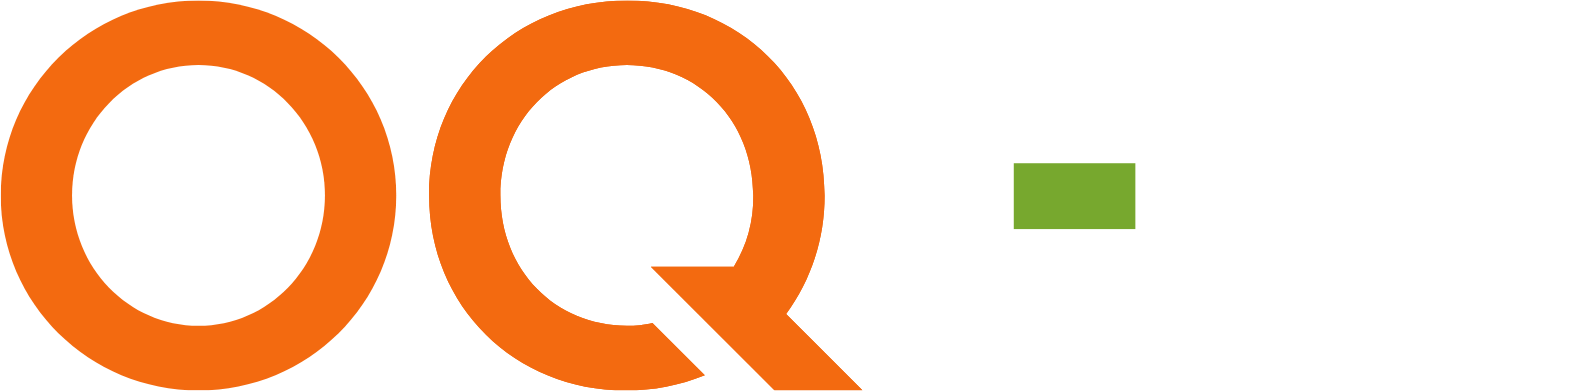 OQ Gas Network Company logo for dark backgrounds (transparent PNG)